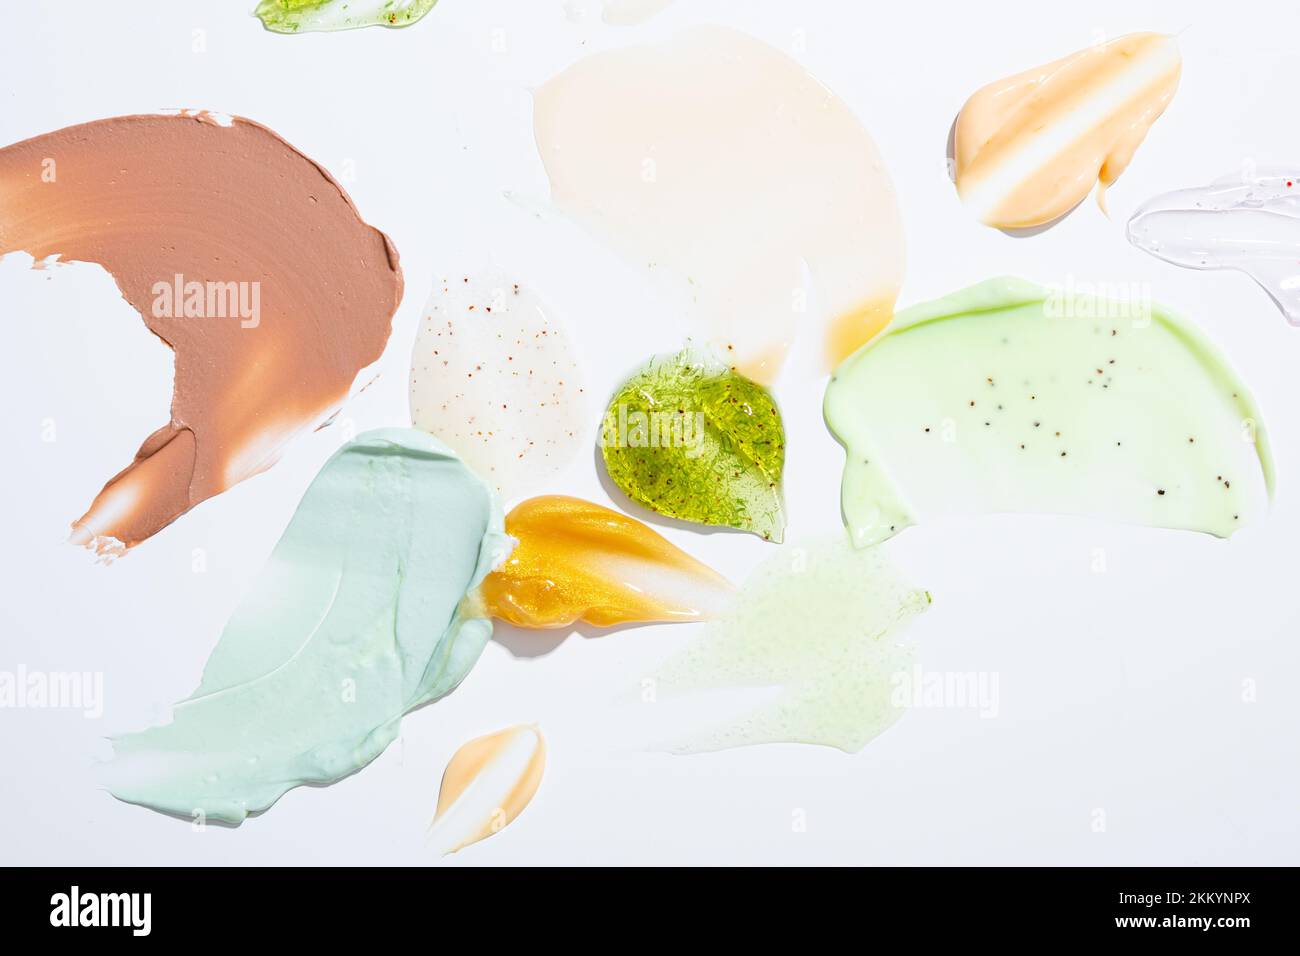 Cosmetic creme swatches and smears on light surface Stock Photo